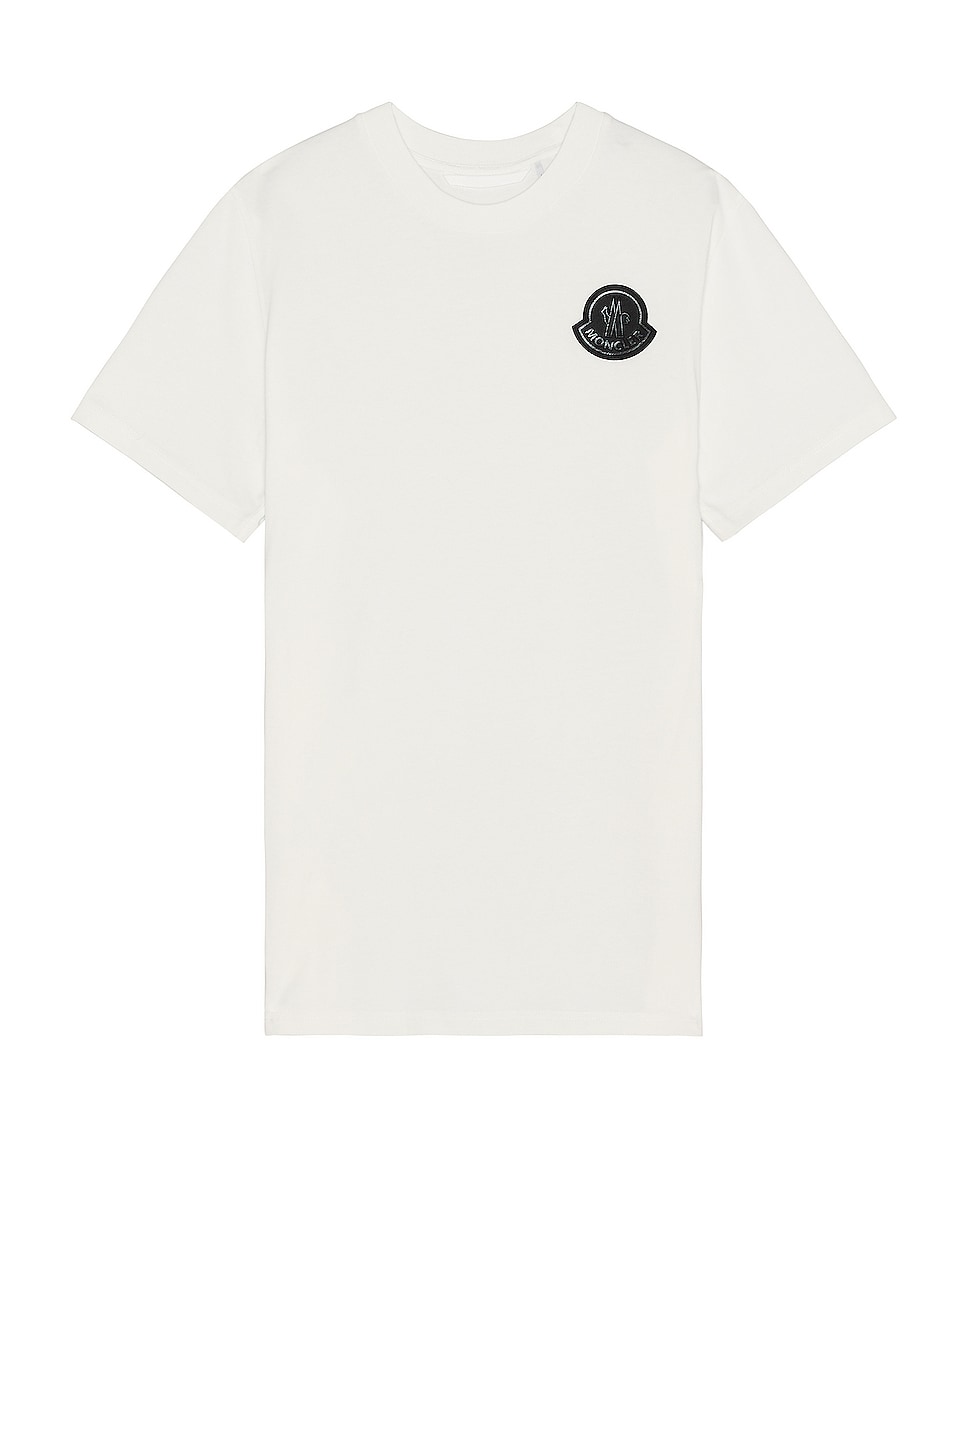 Moncler T-shirt in White